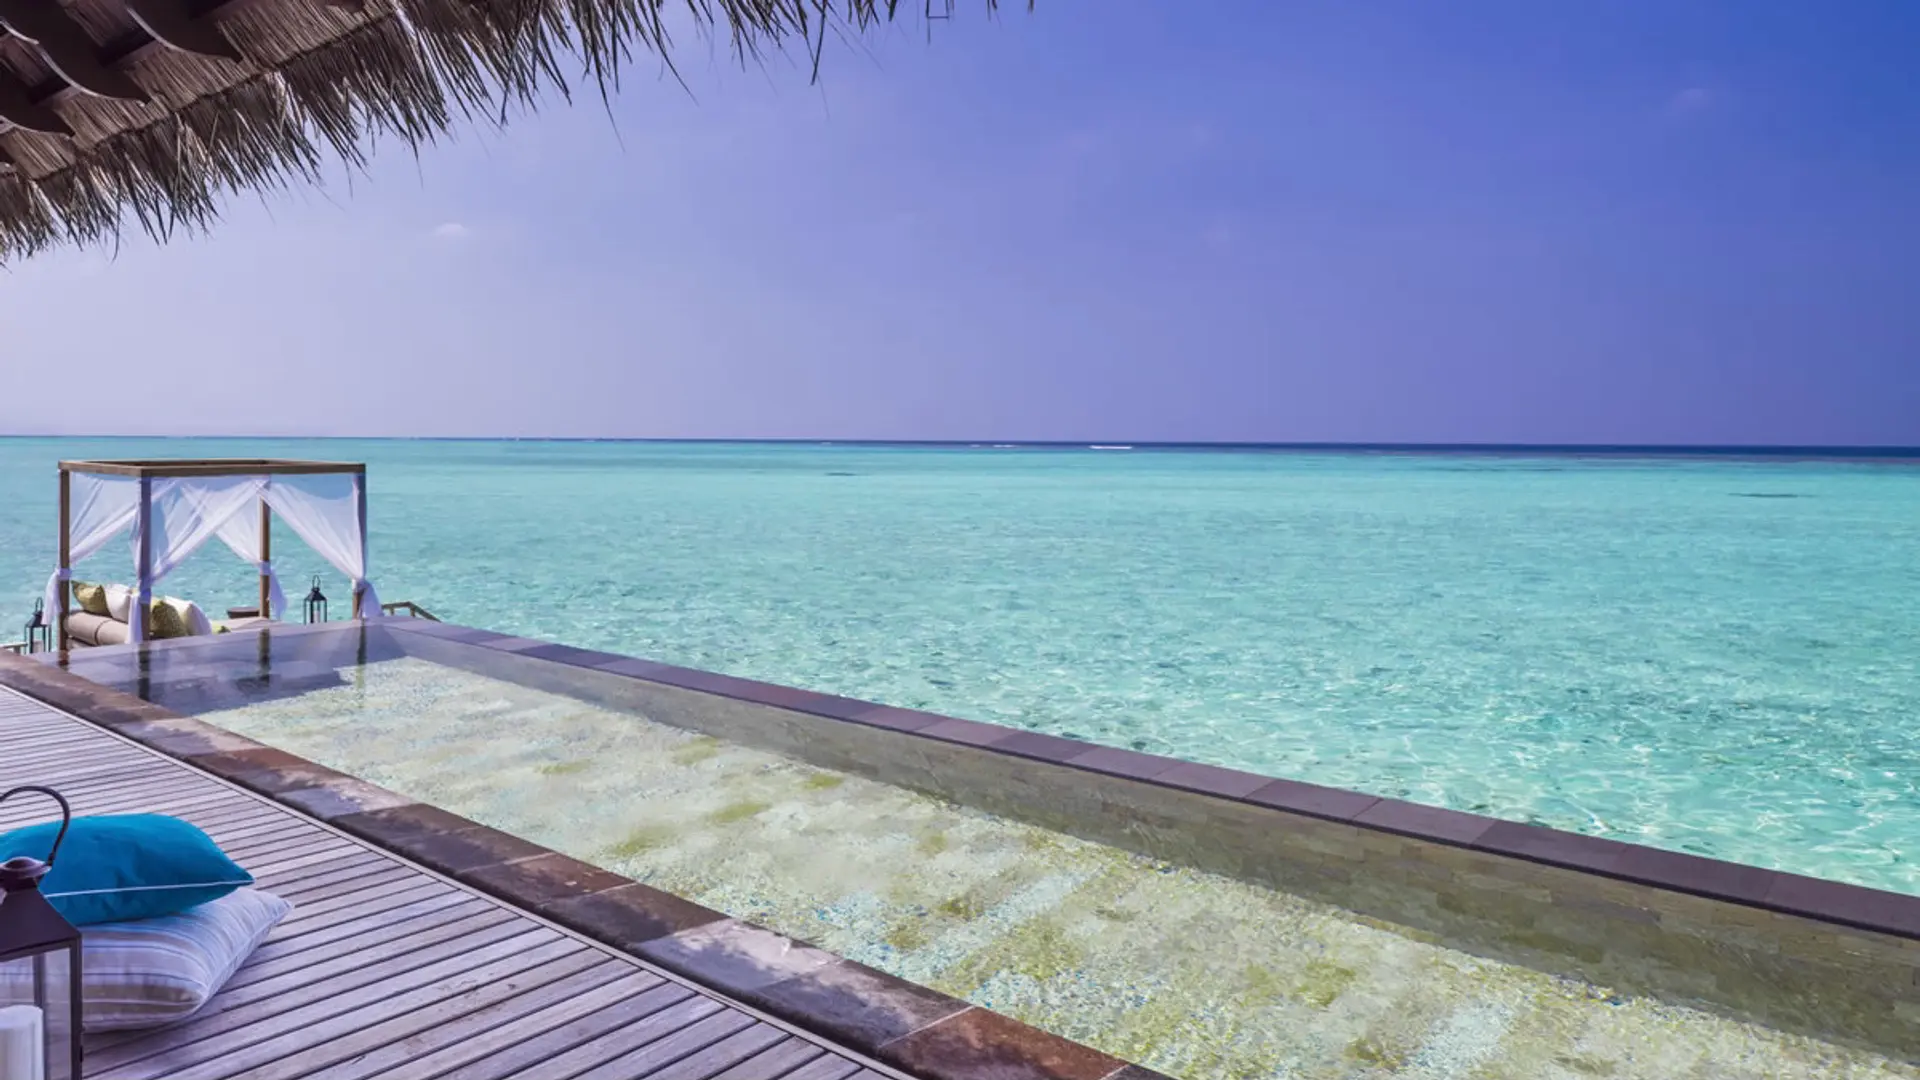 OneAndOnly_ReethiRah_Accommodation_GrandWaterVilla_PrivateInfinityPool_V1a_LR.jpg